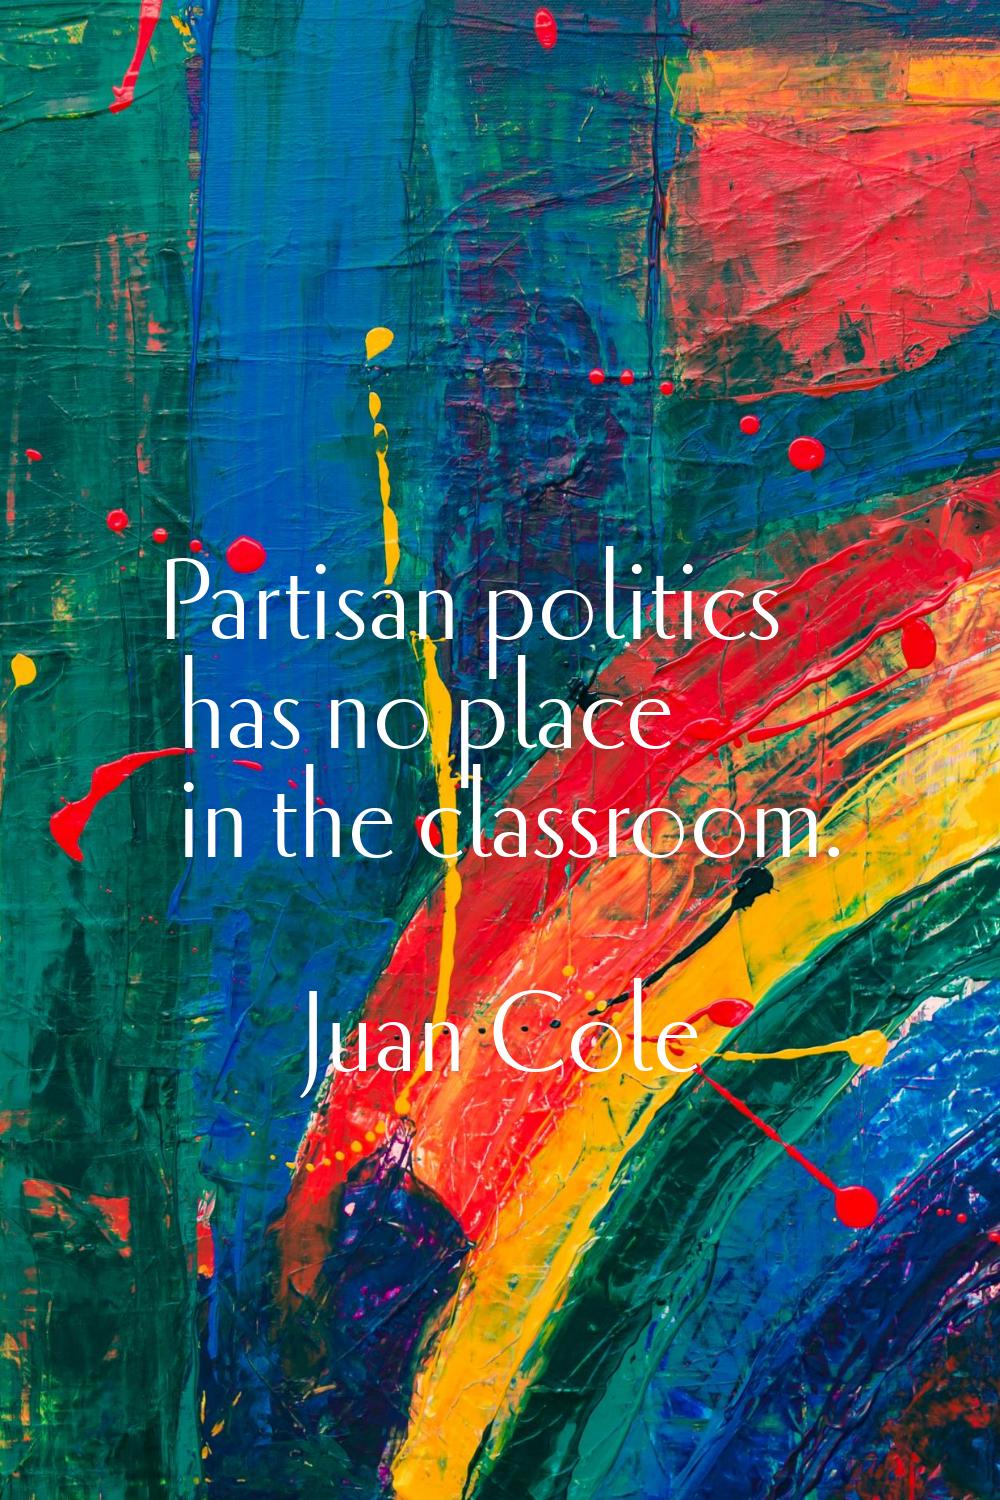 Partisan politics has no place in the classroom.